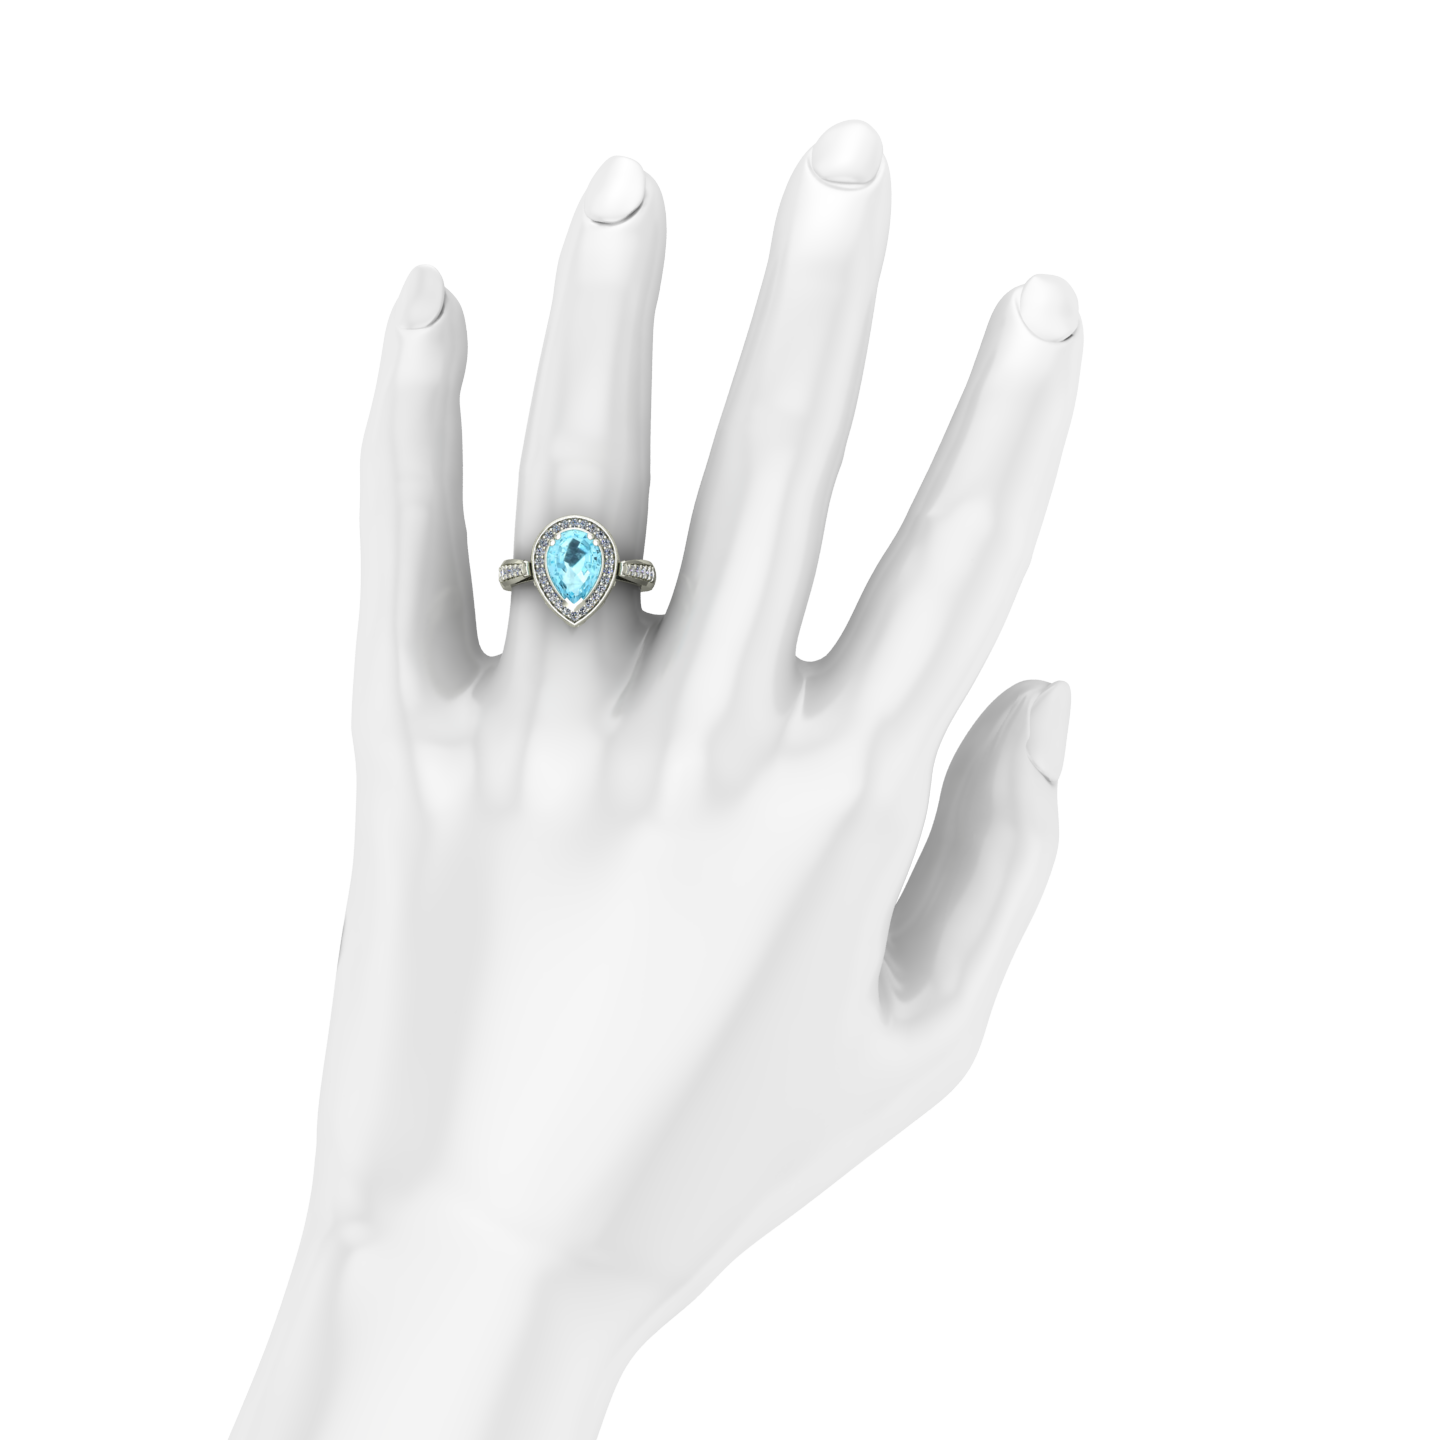 Aquamarine and diamond pear scroll ring in 14k white gold - Charles Babb Designs - on hand